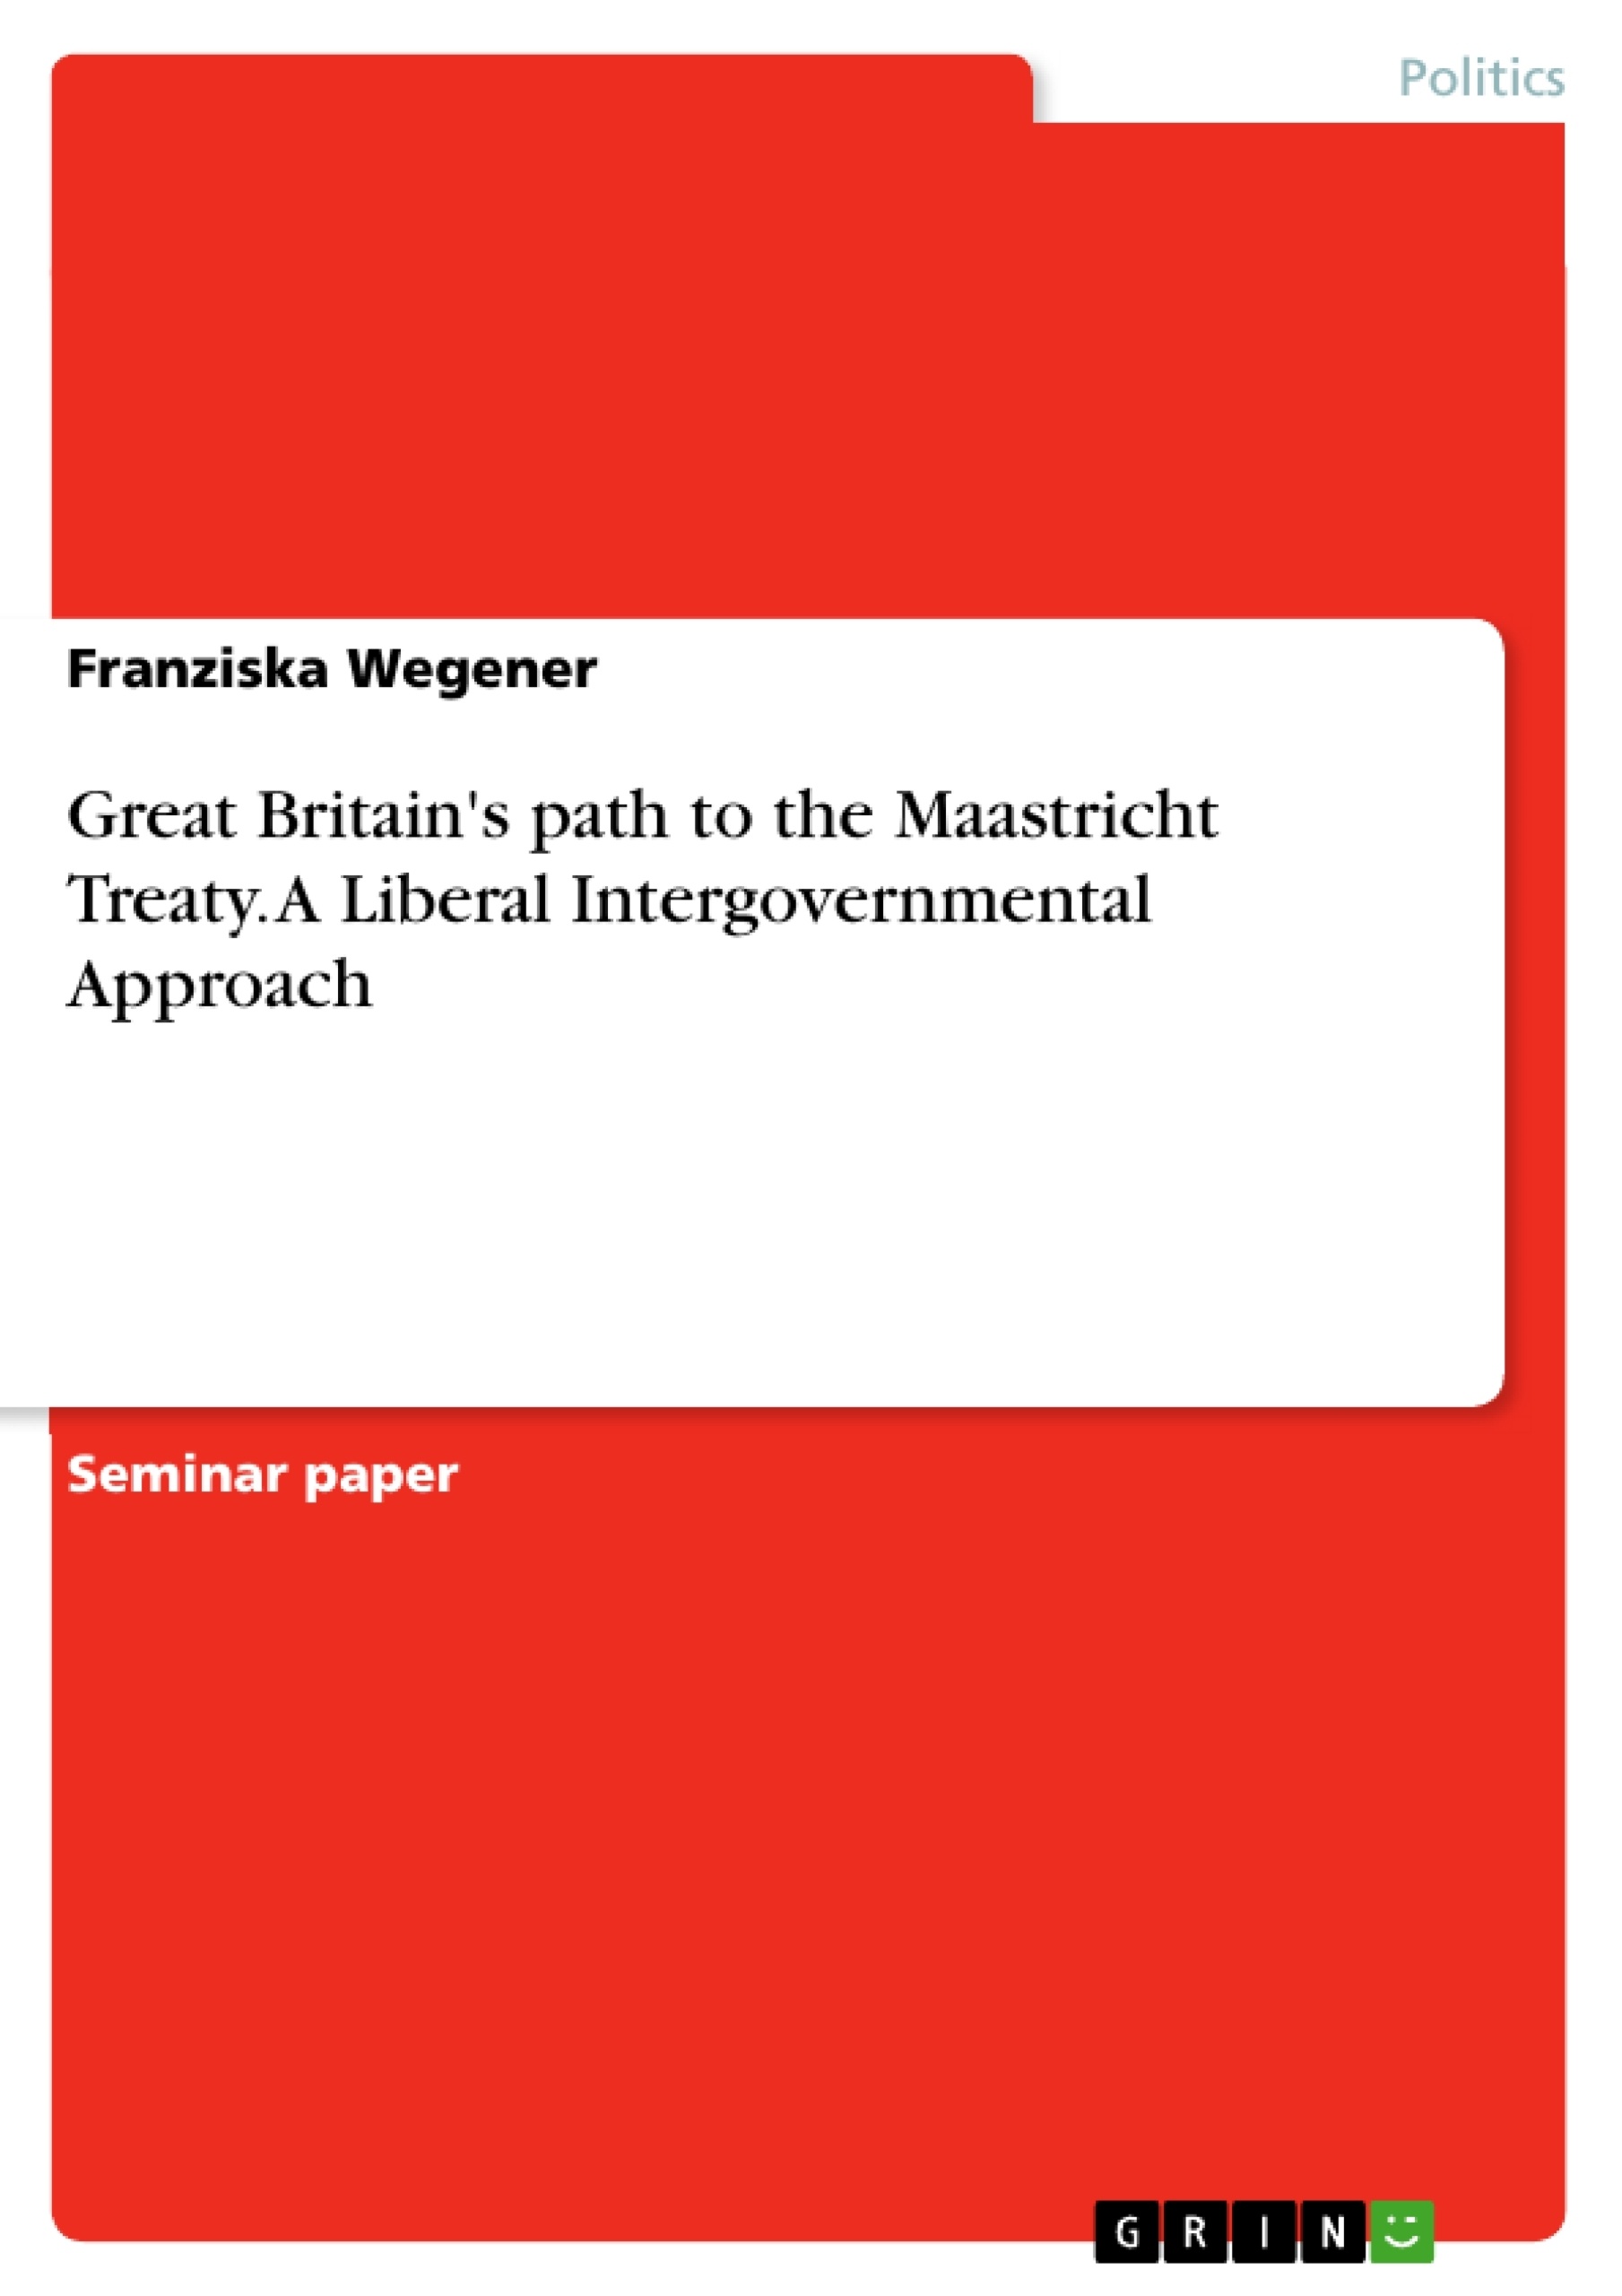 Title: Great Britain's path to the Maastricht Treaty. A Liberal Intergovernmental Approach